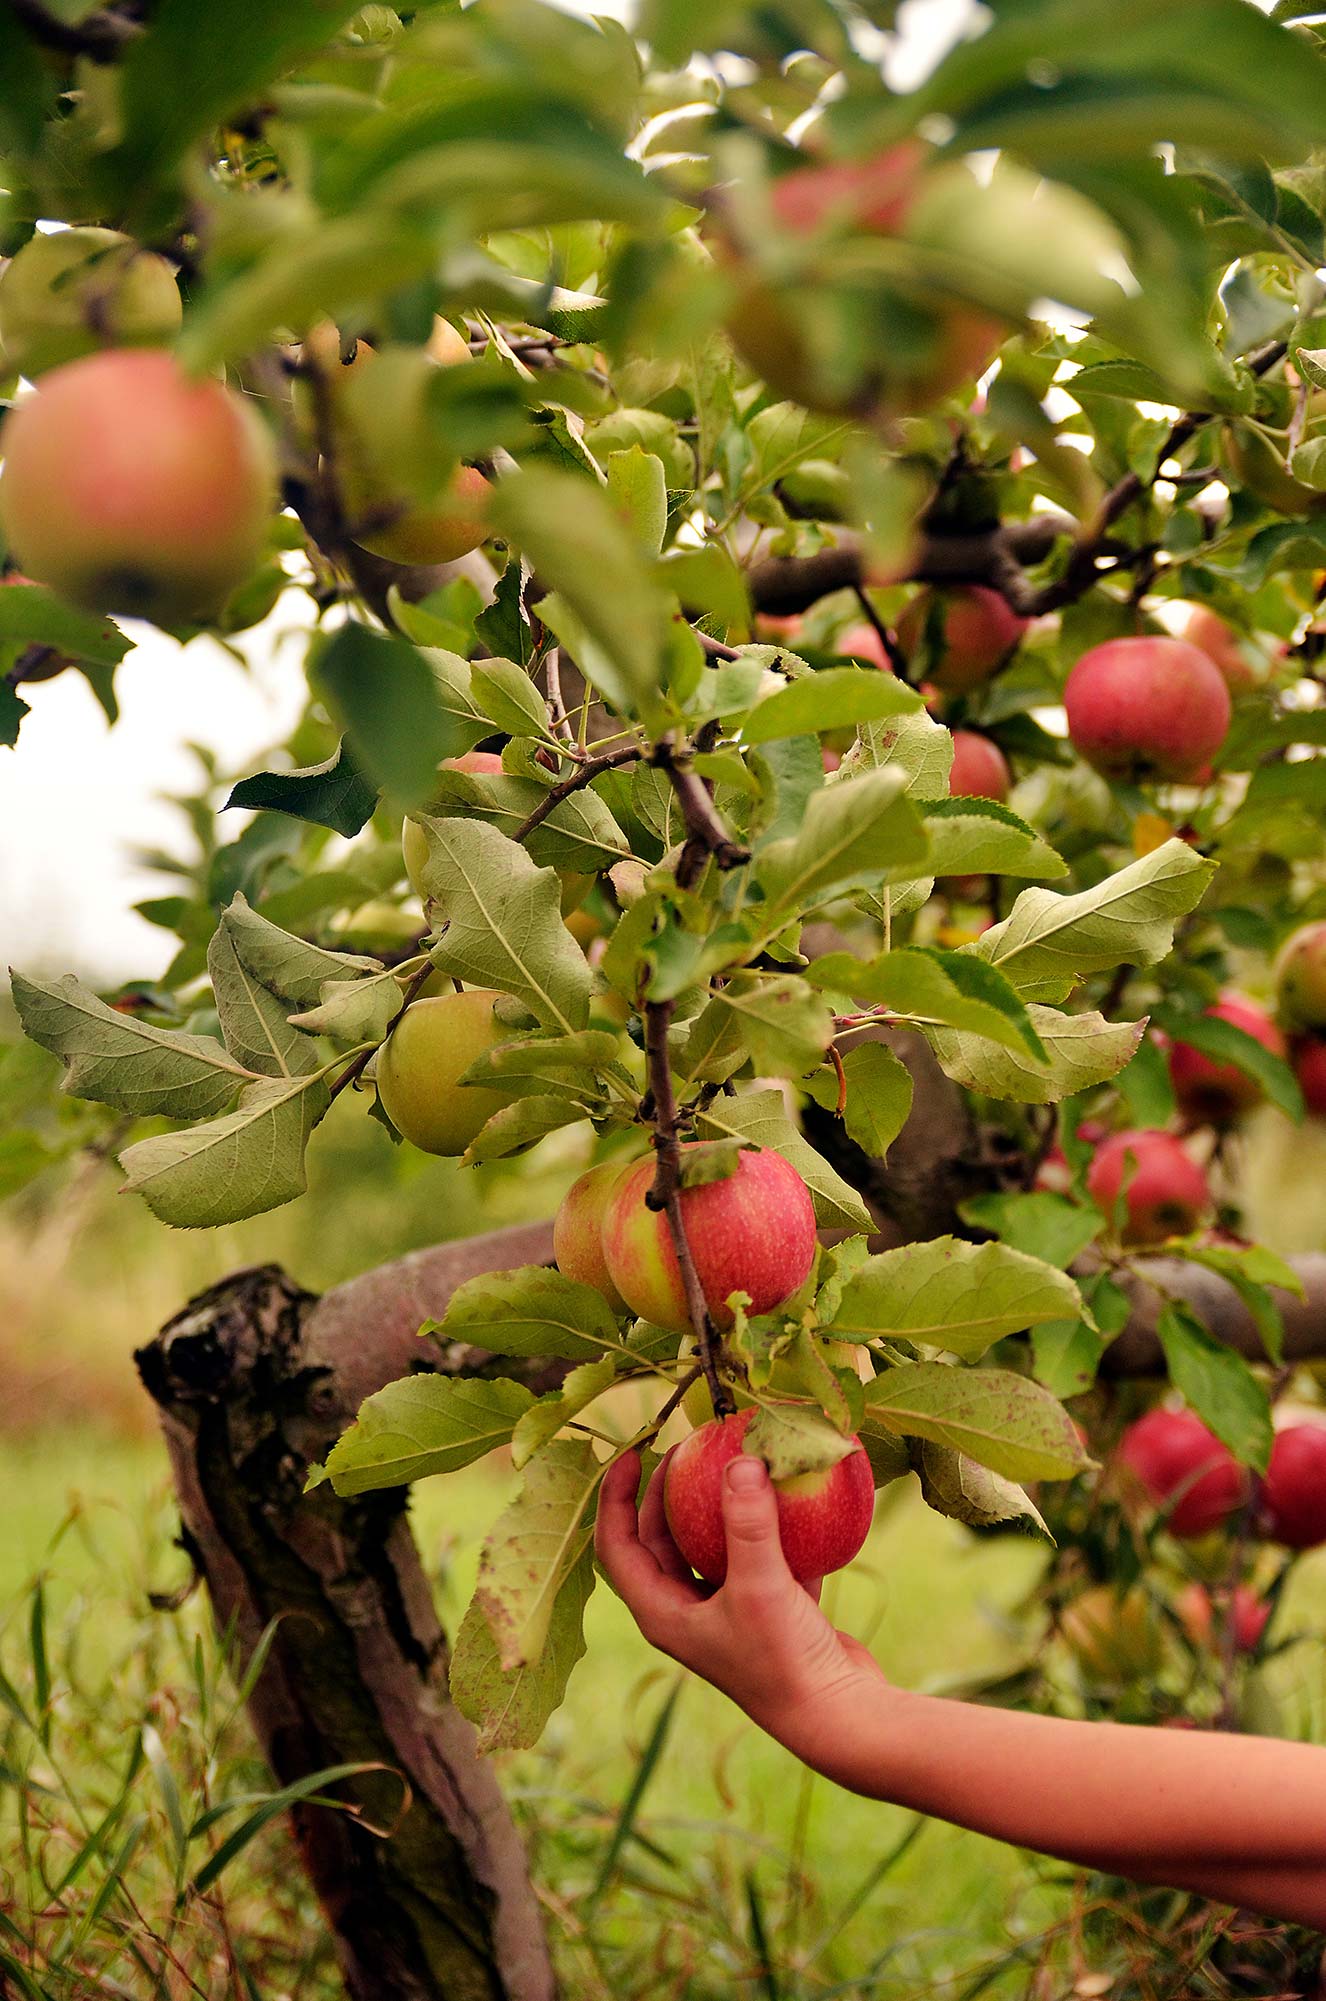 Try a new variety of apple this year | Edible Michiana
